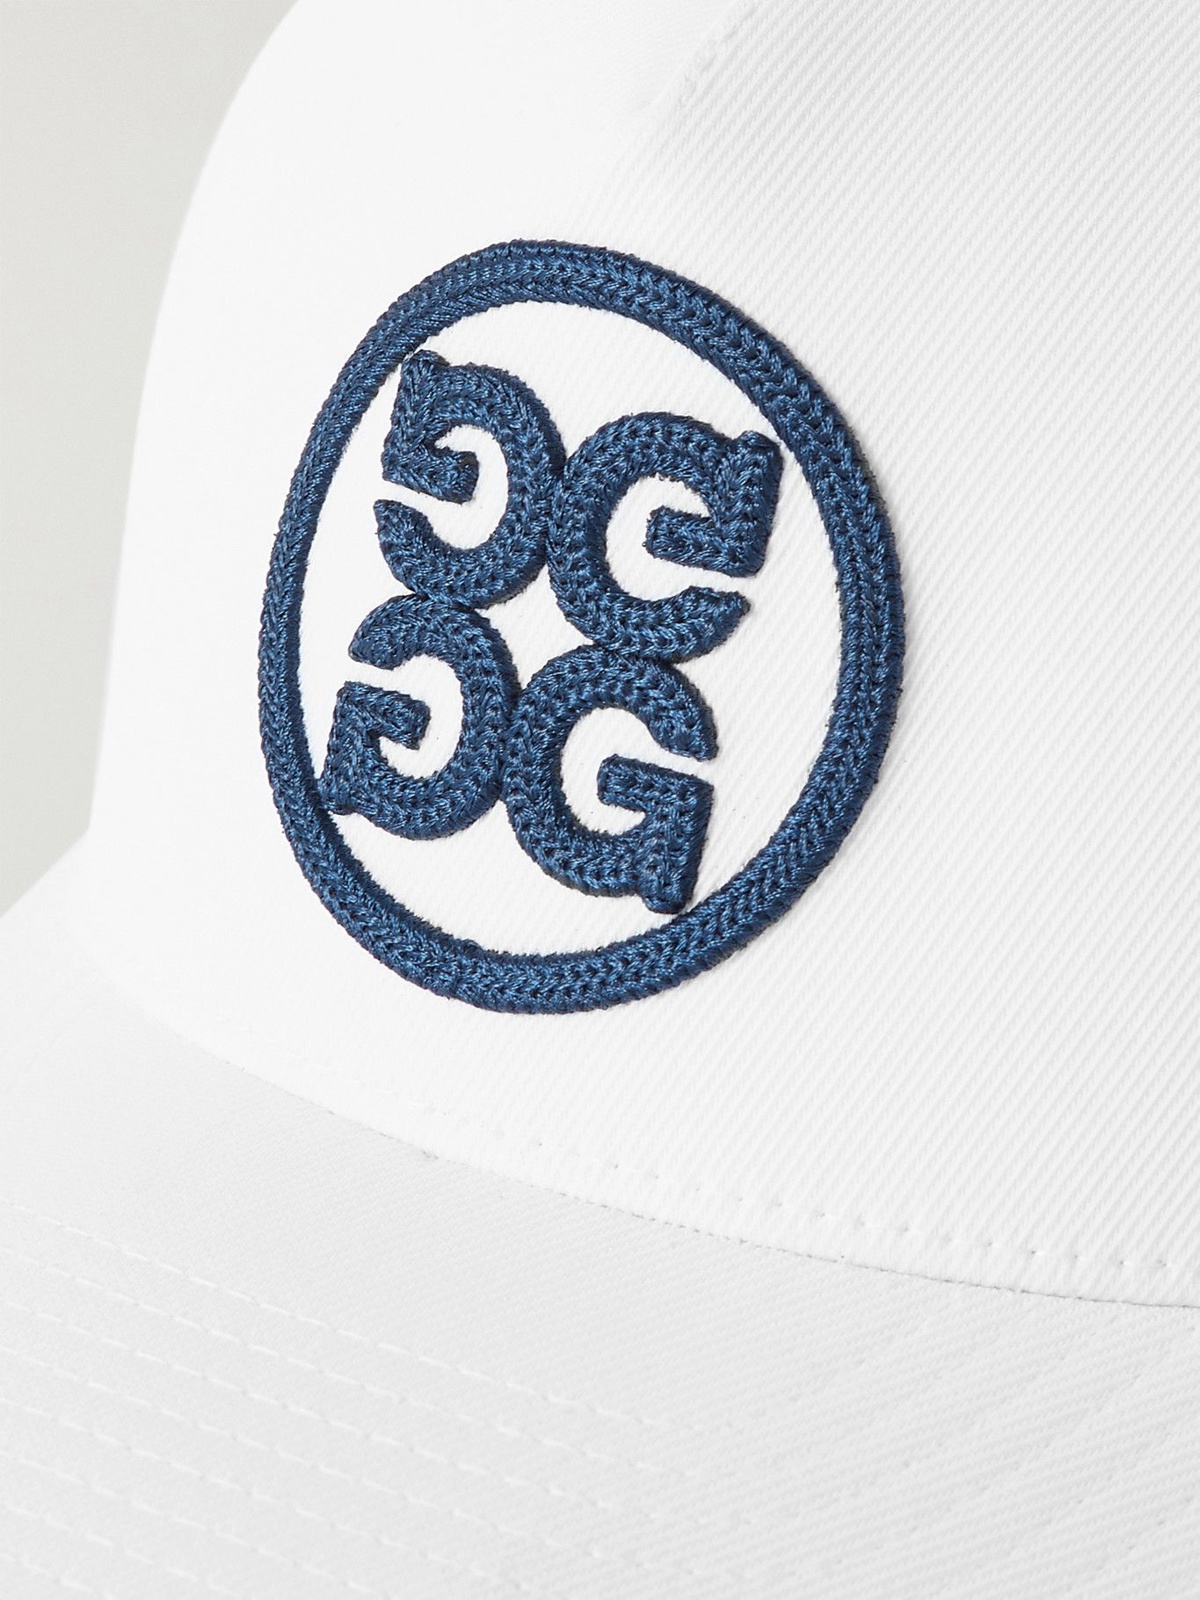 G/FORE logo-embroidered Baseball Cap - Farfetch